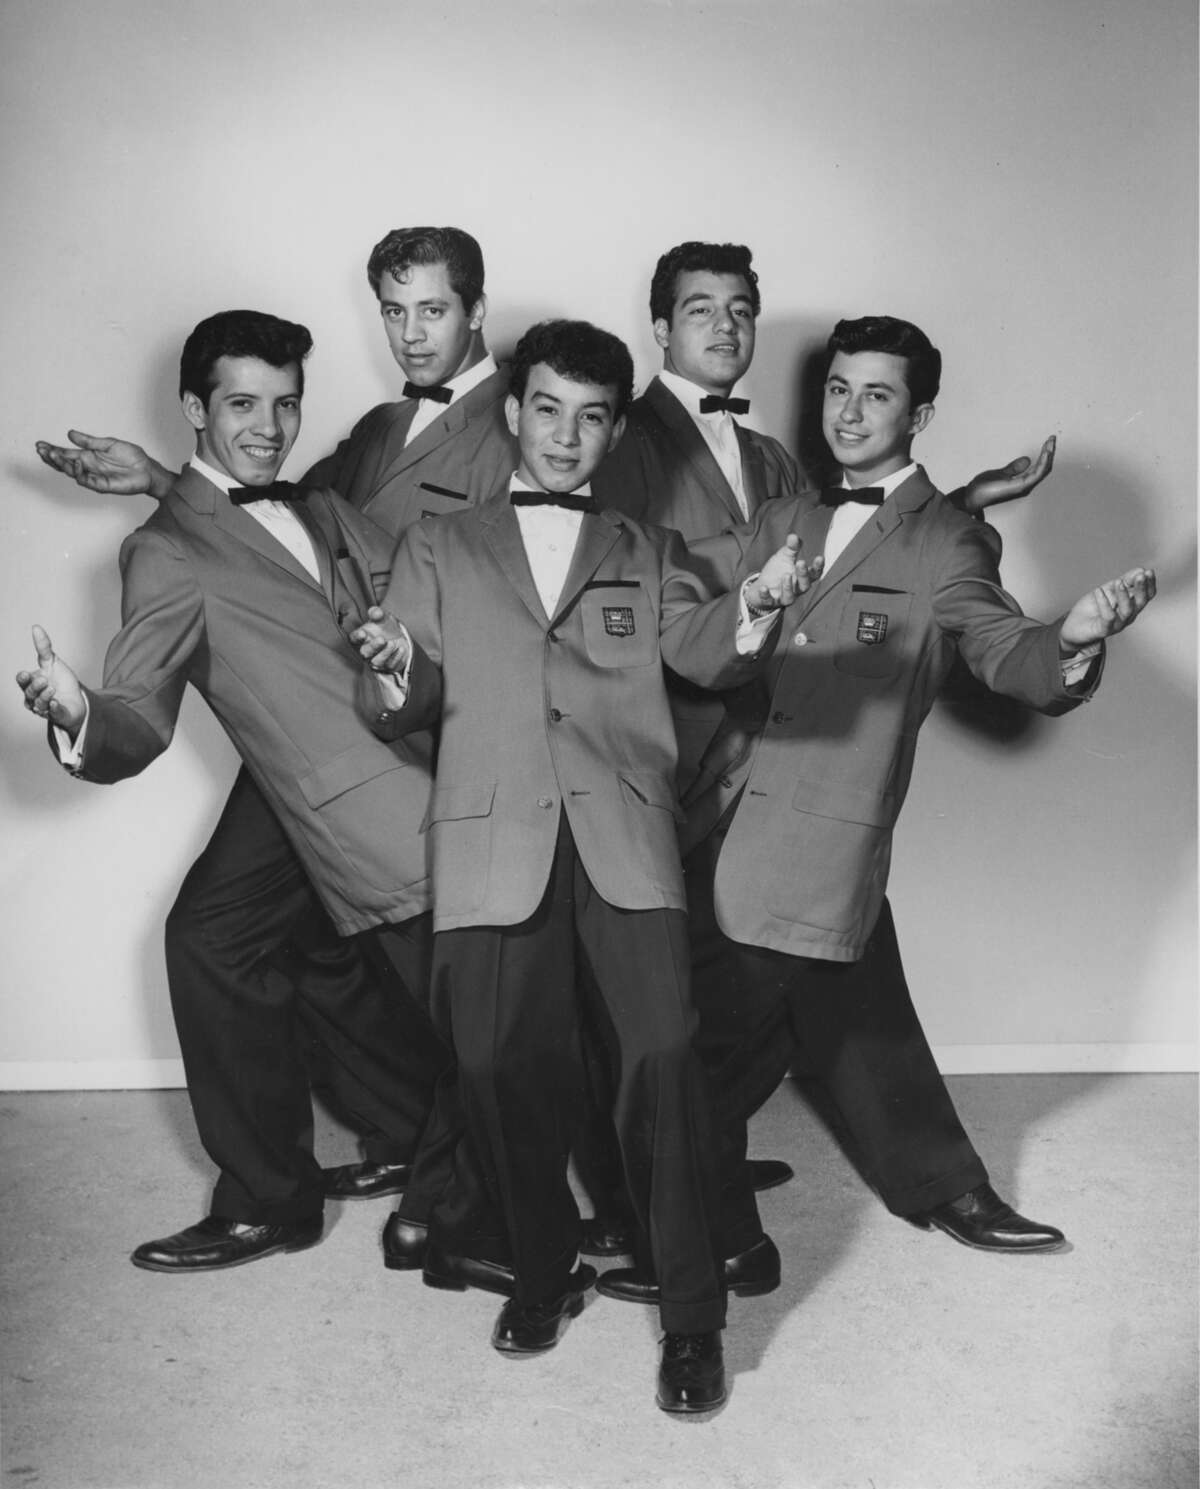 In 1960, the Royal Jesters' lineup was Toni Arci (from left), Louis Escalante, Henry Hernandez, Mike Pedraza and Oscar Lawson.